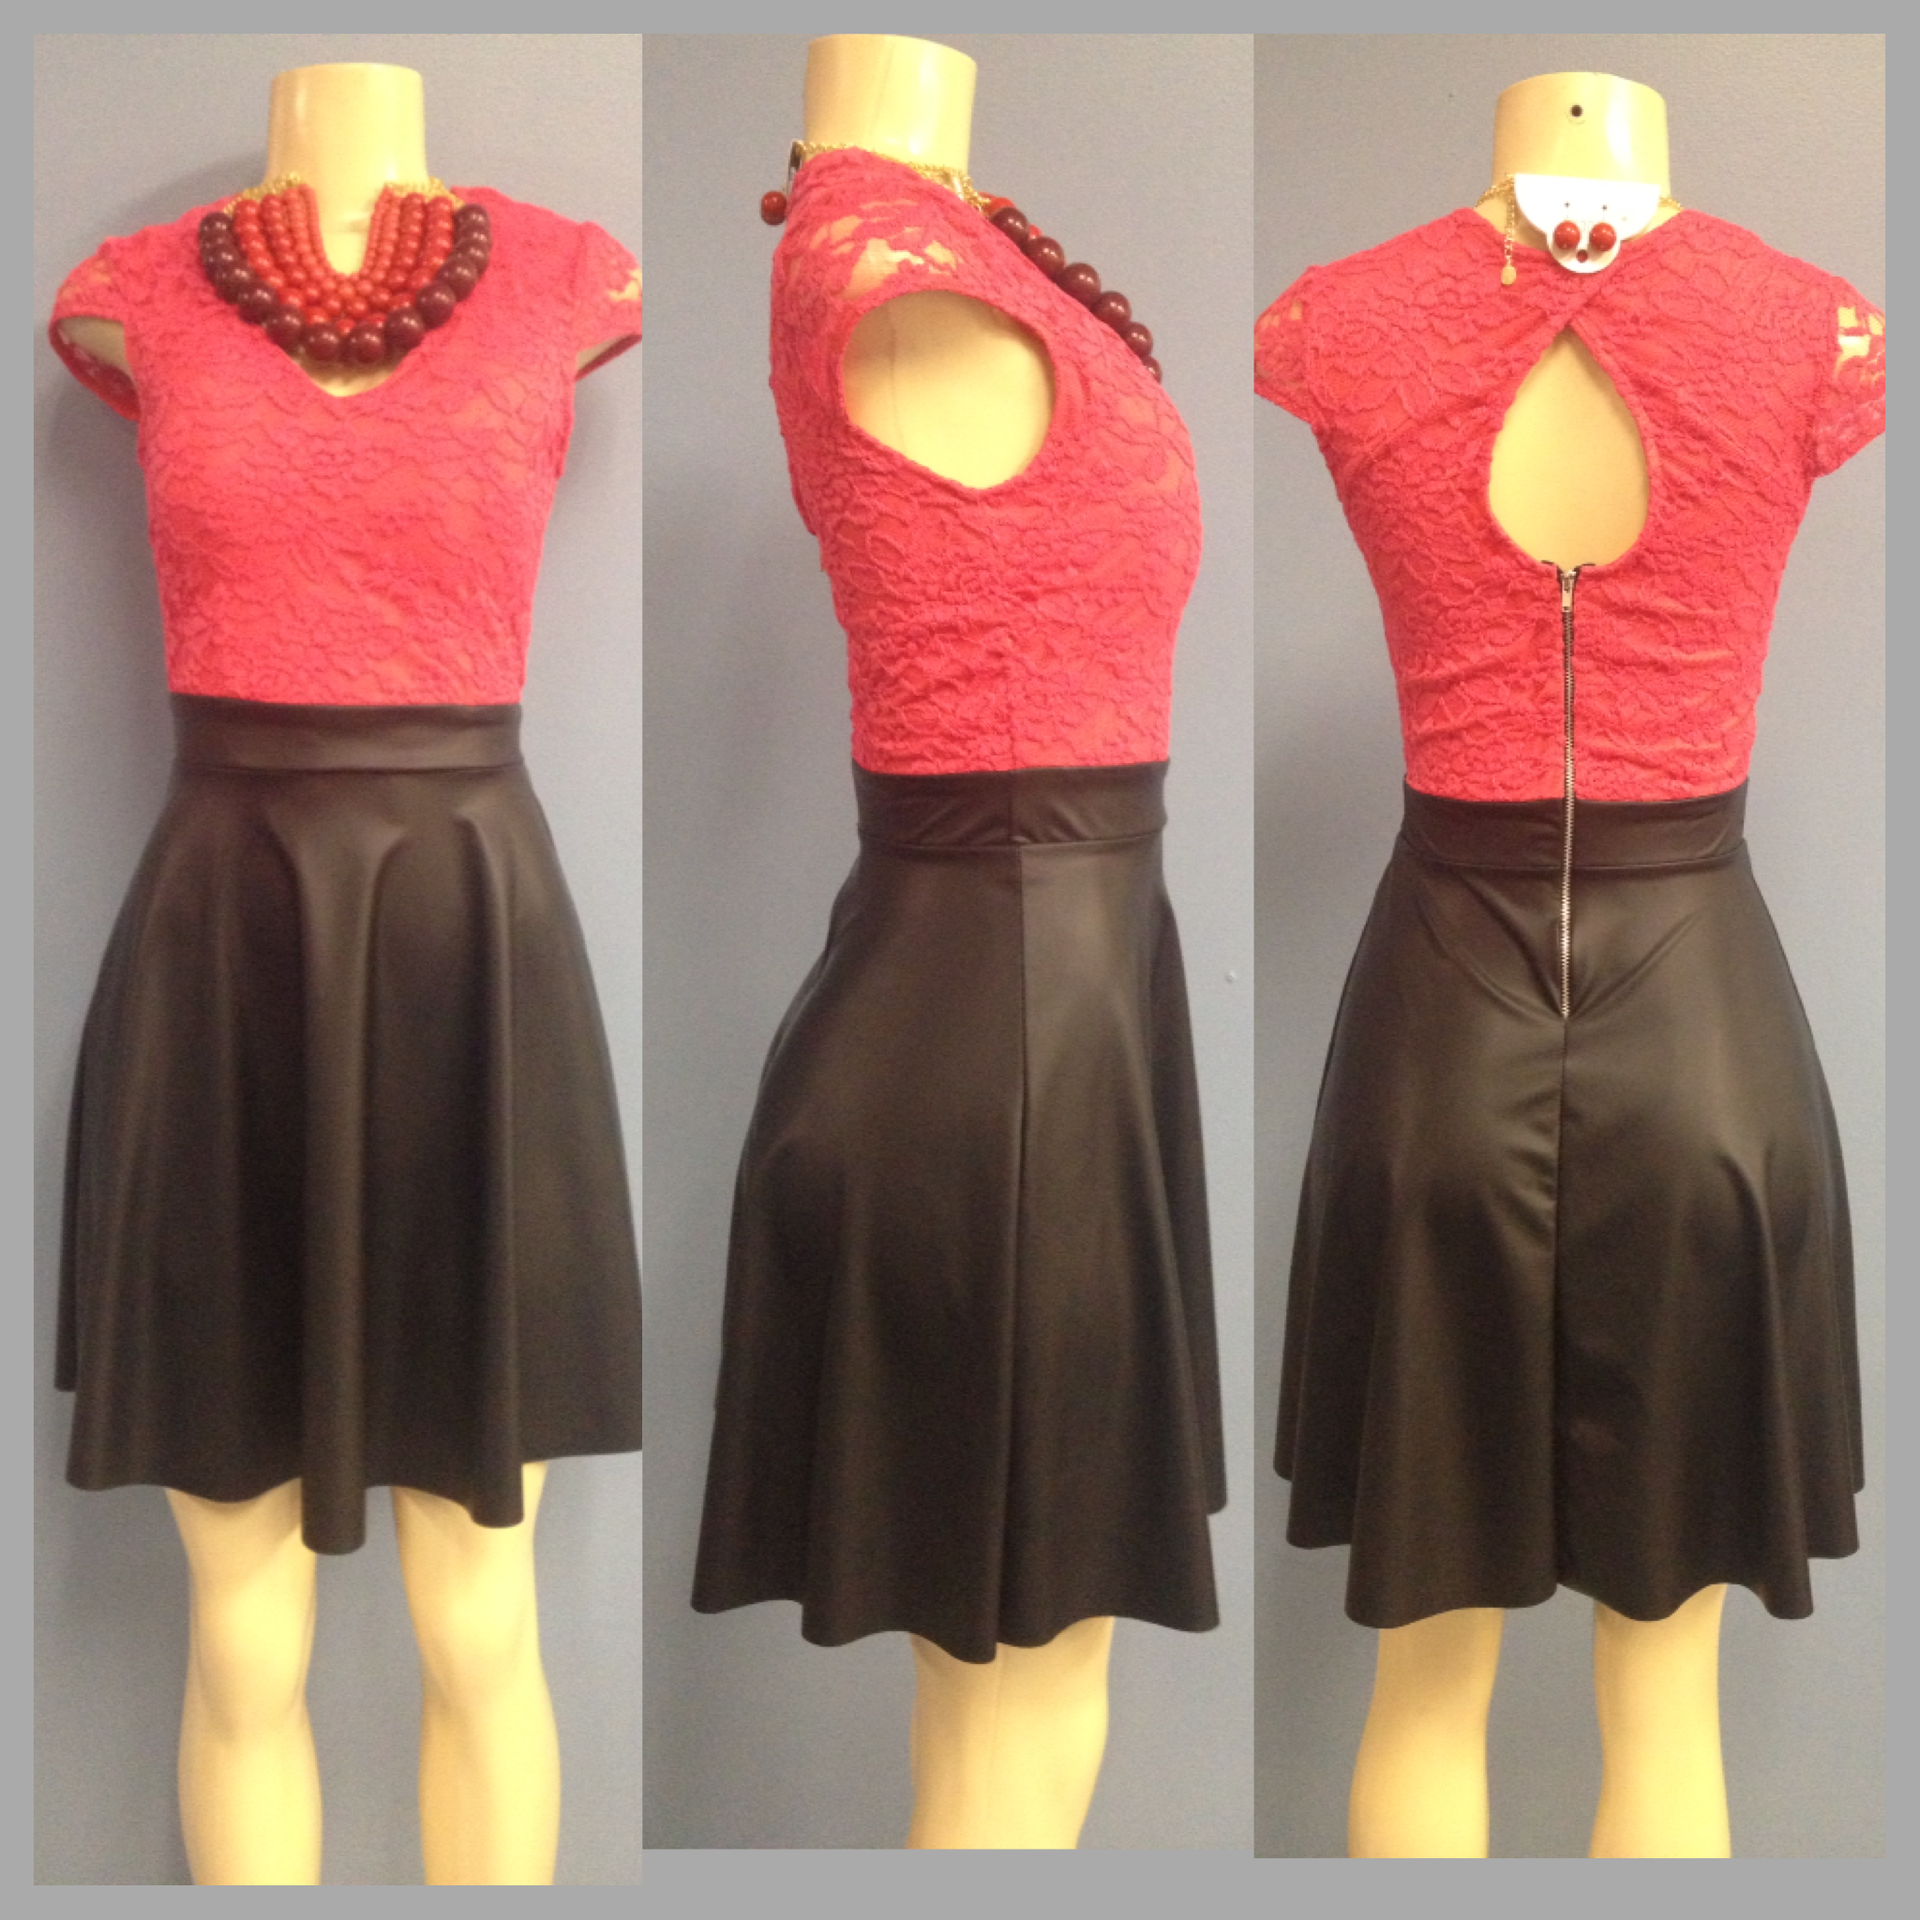 Coral lace and black liquid leather mini dress with attached bra size large $55